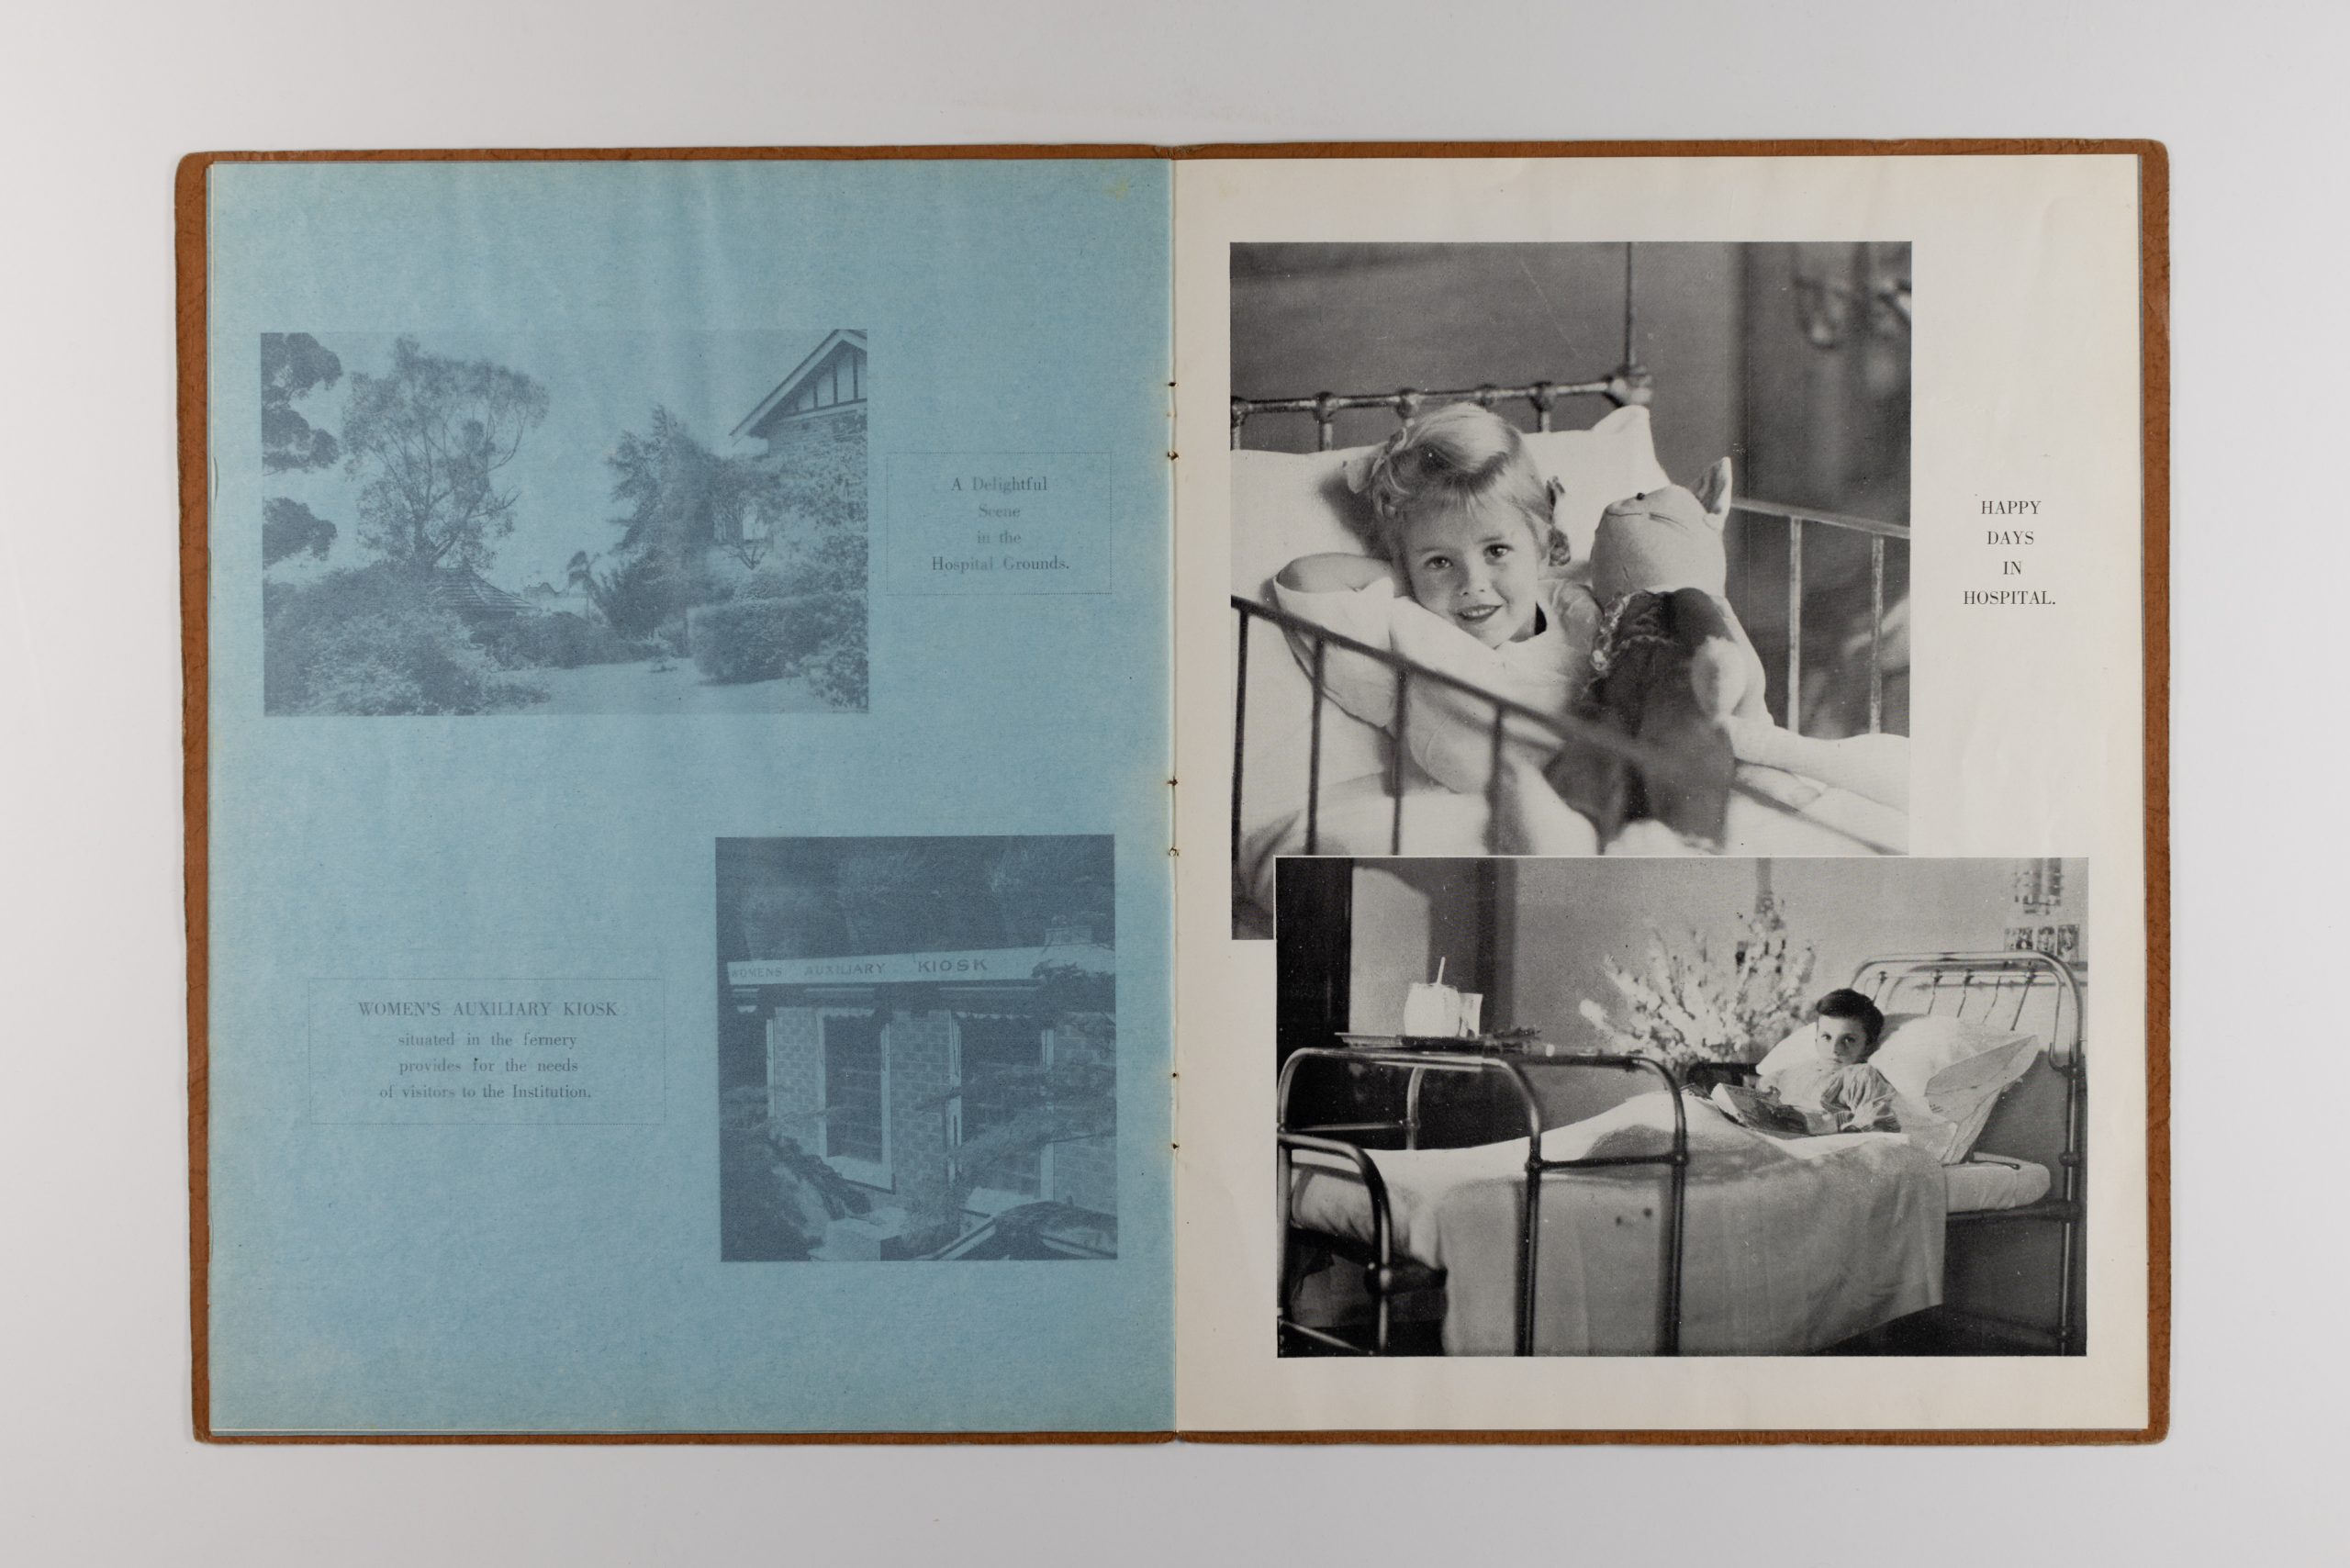 open pages of booklet, the left page is a semi-transparent blue page, the right page has photographs of happy children in hospital beds